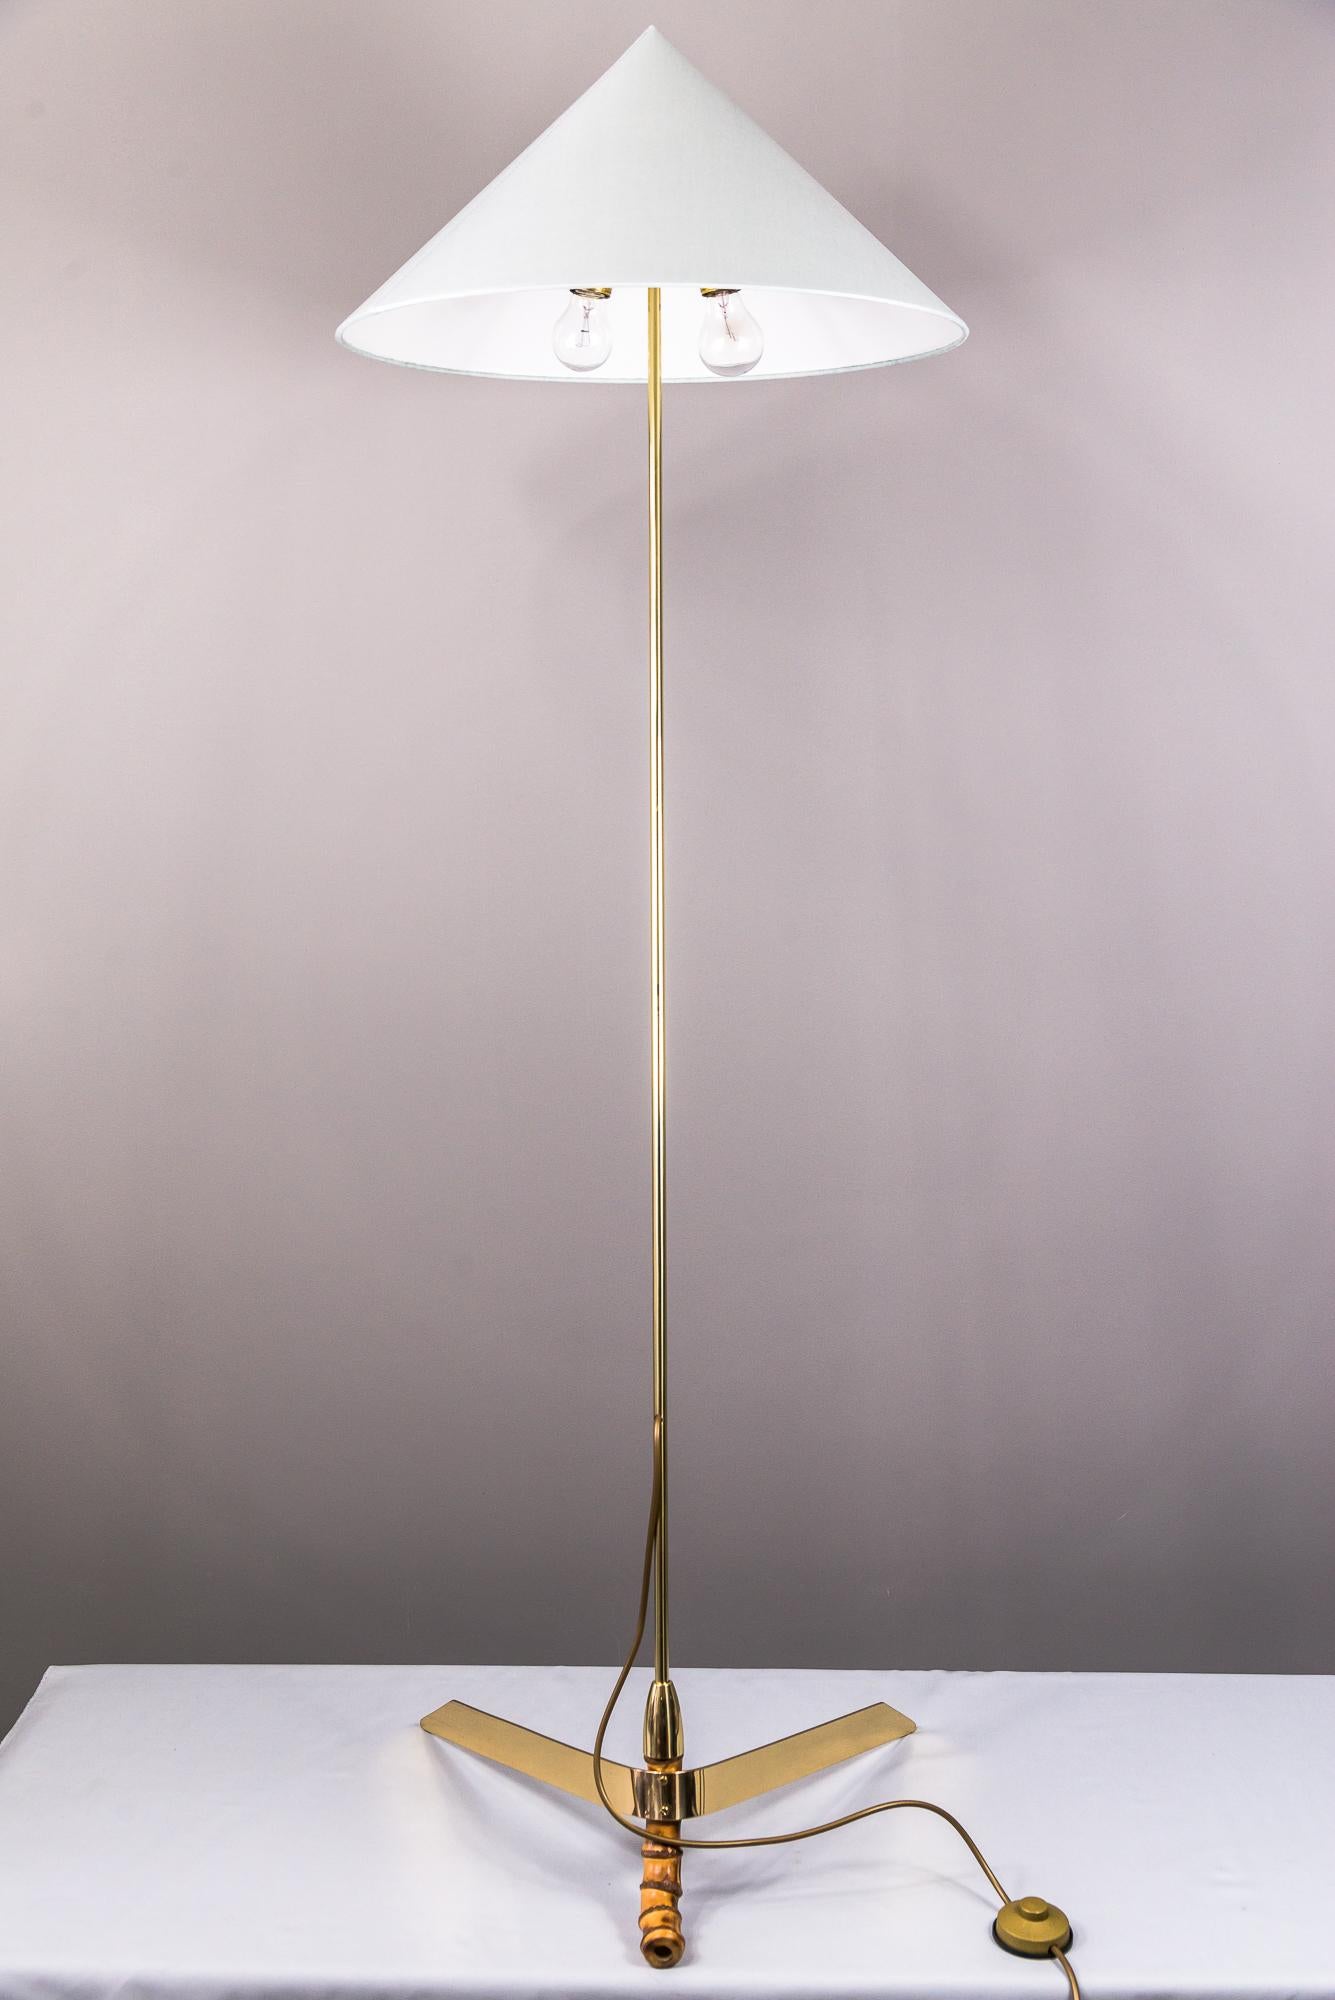 Rupert Nikoll floorlamp, circa 1950s
Polished and stove enamelled
The shade is replaced (New).